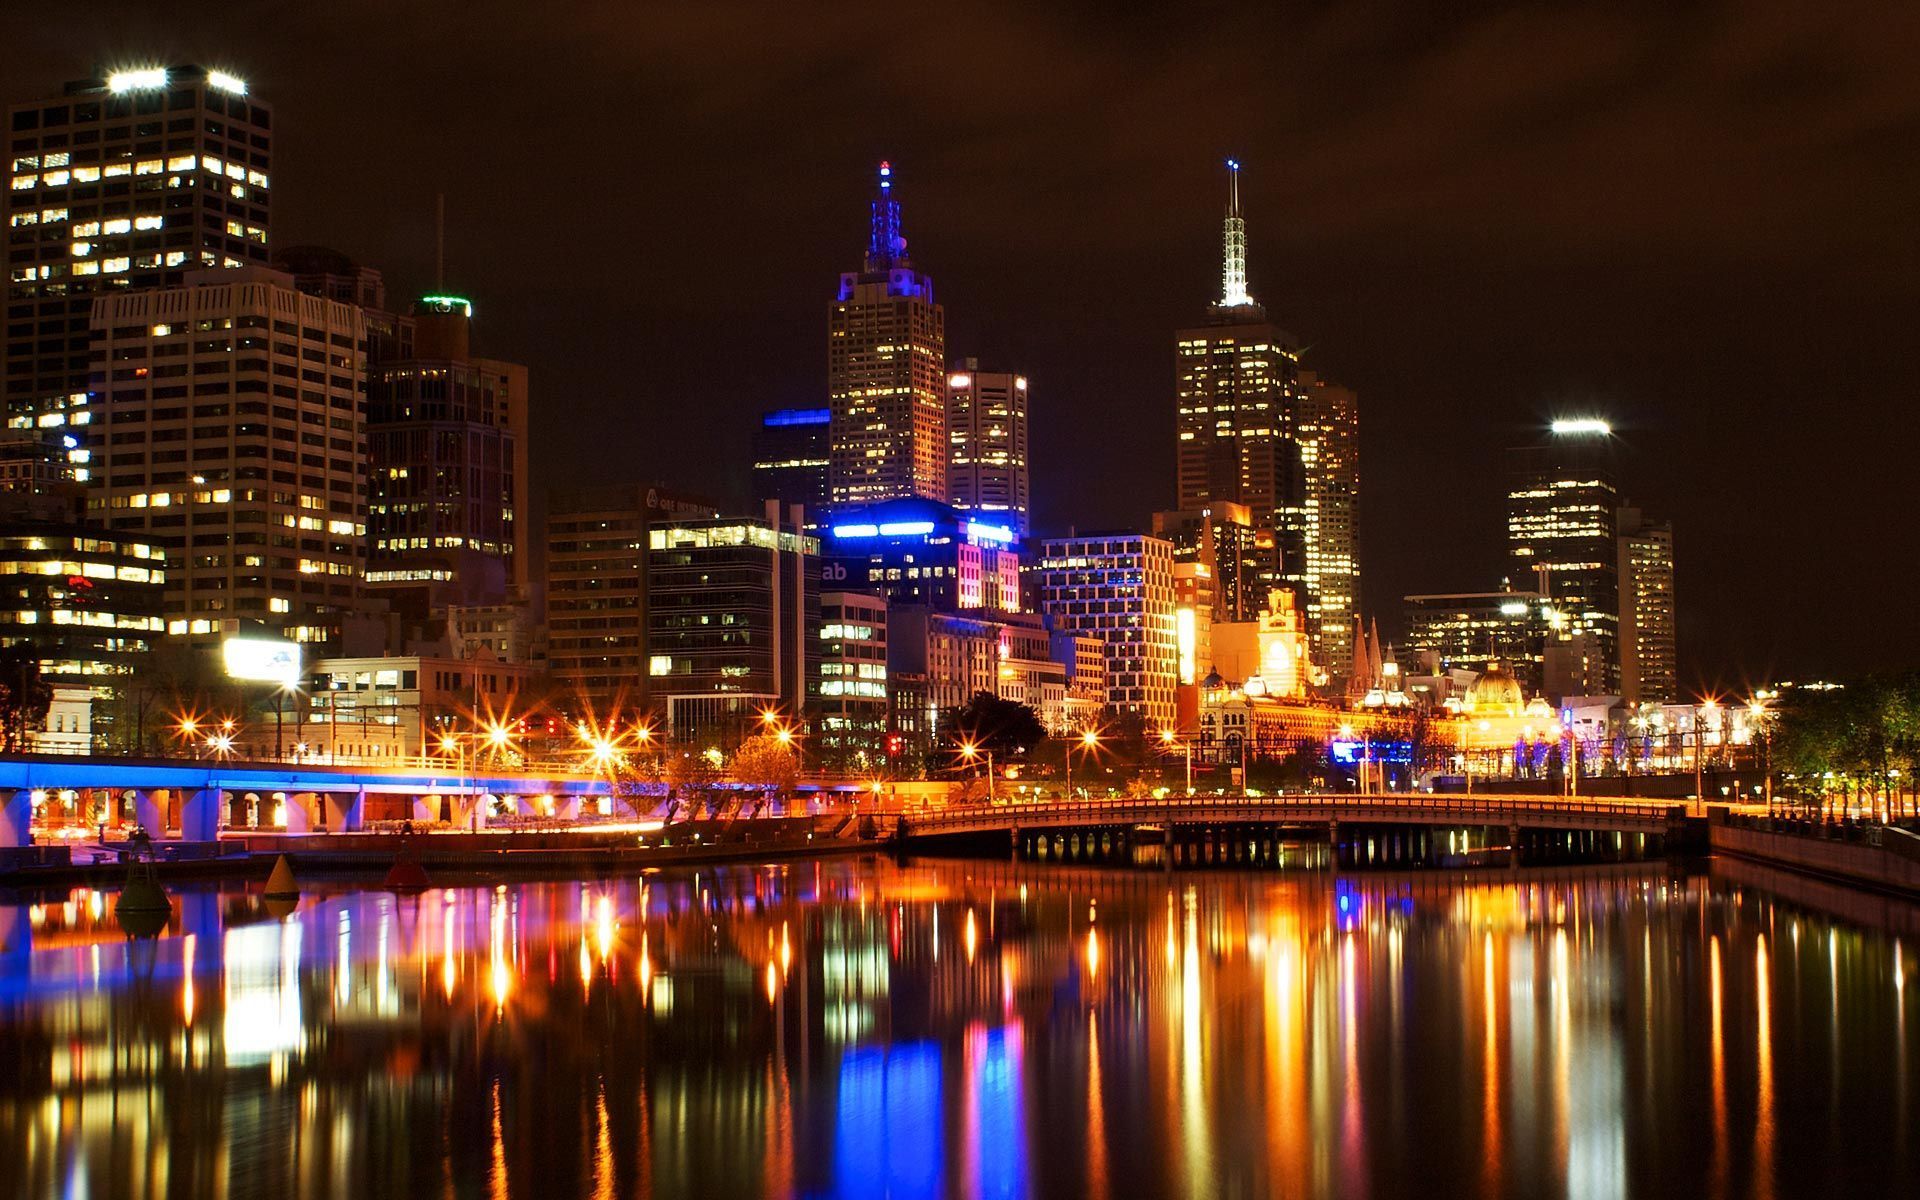 Melbourne HD Wallpapers - HD Wallpapers Backgrounds of Your Choice